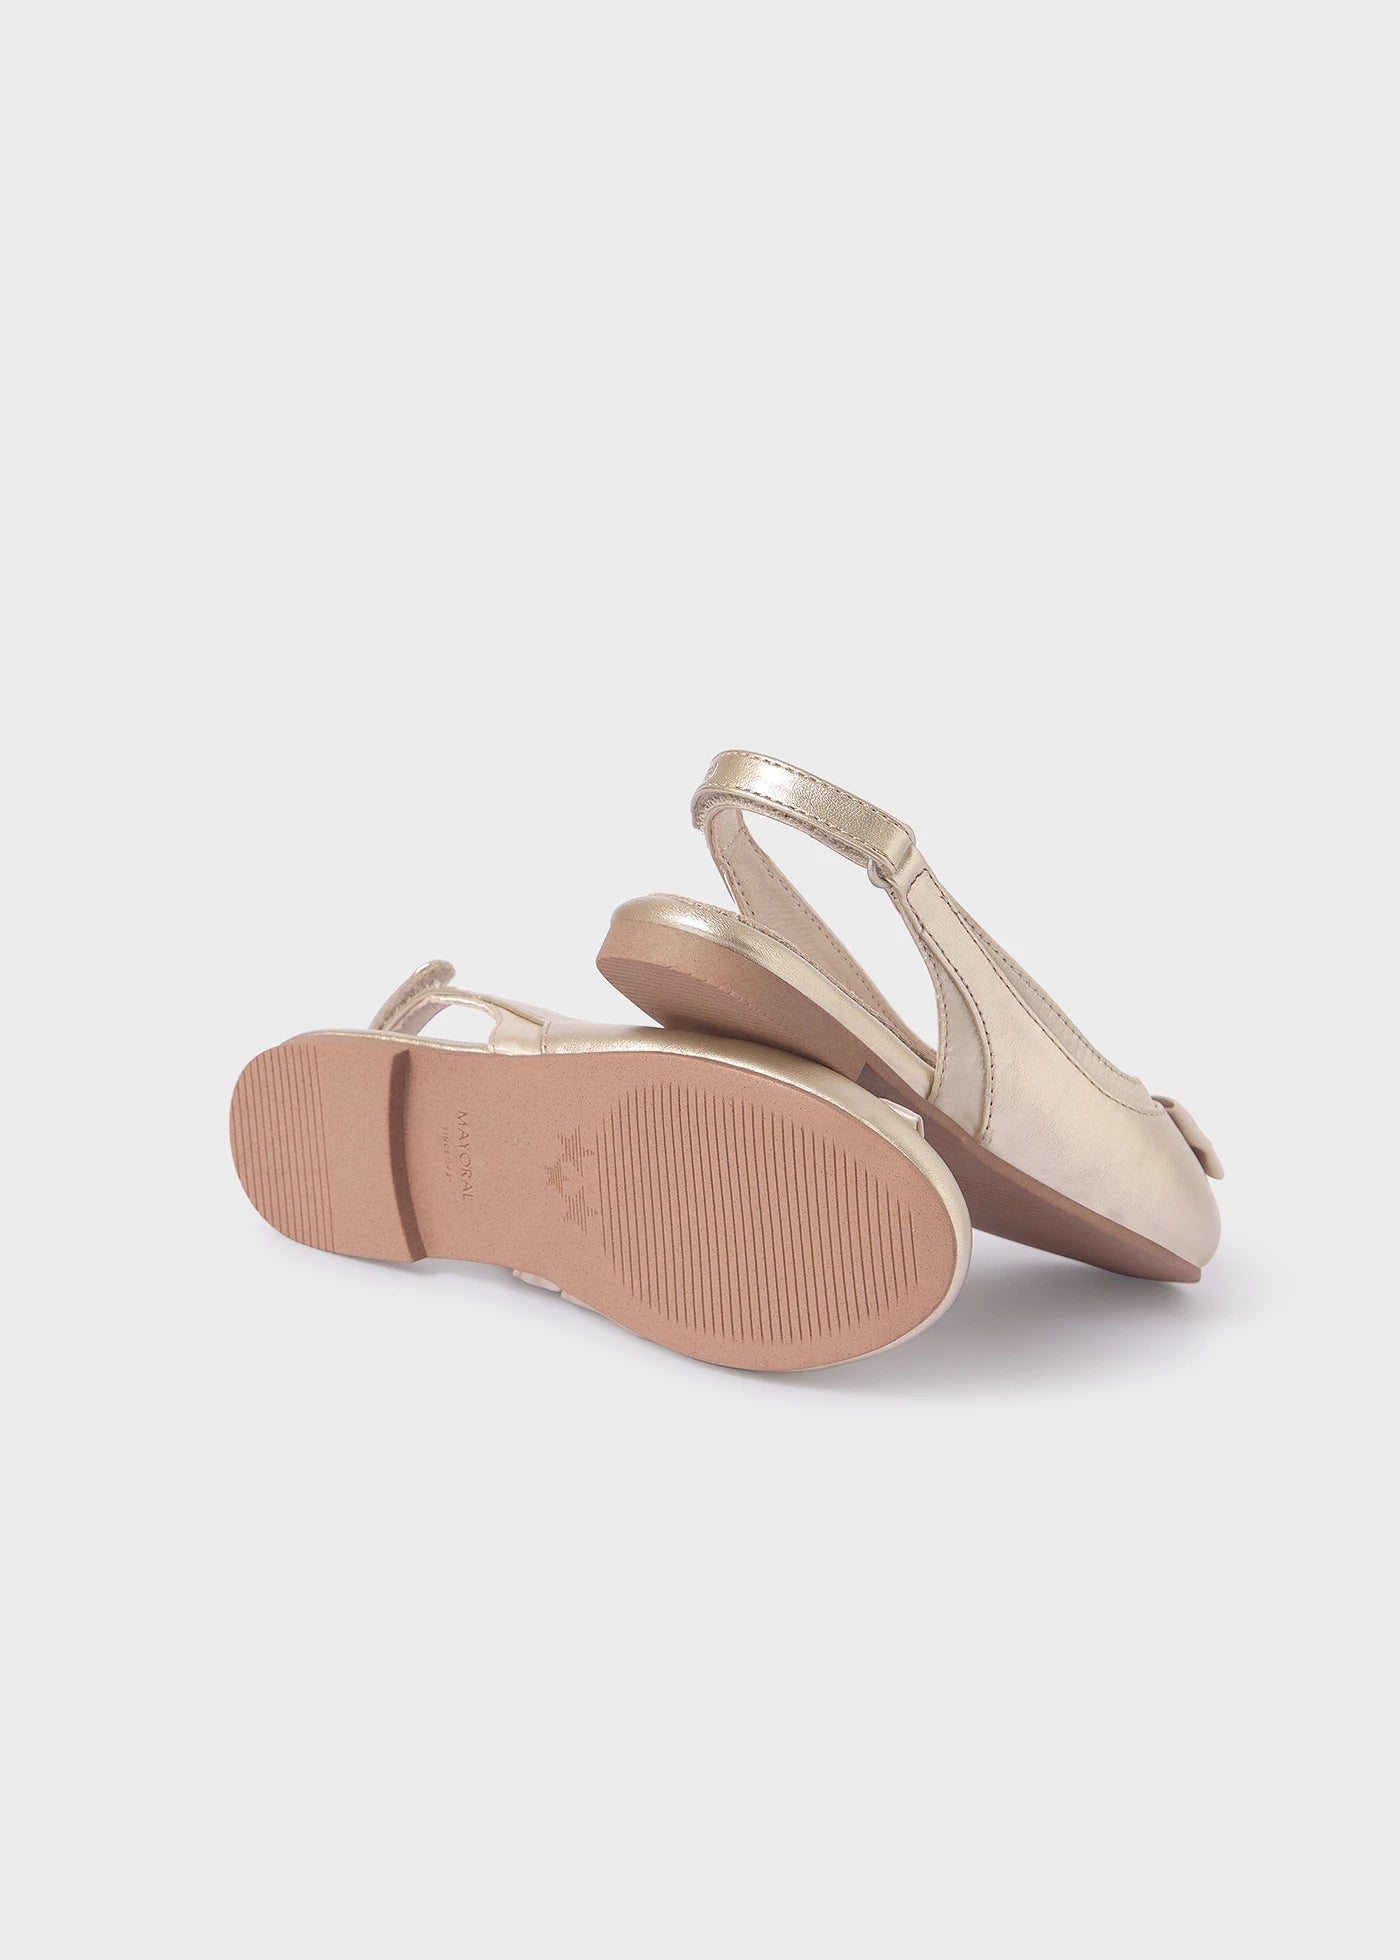 Girls bow ballet flats sustainable leather